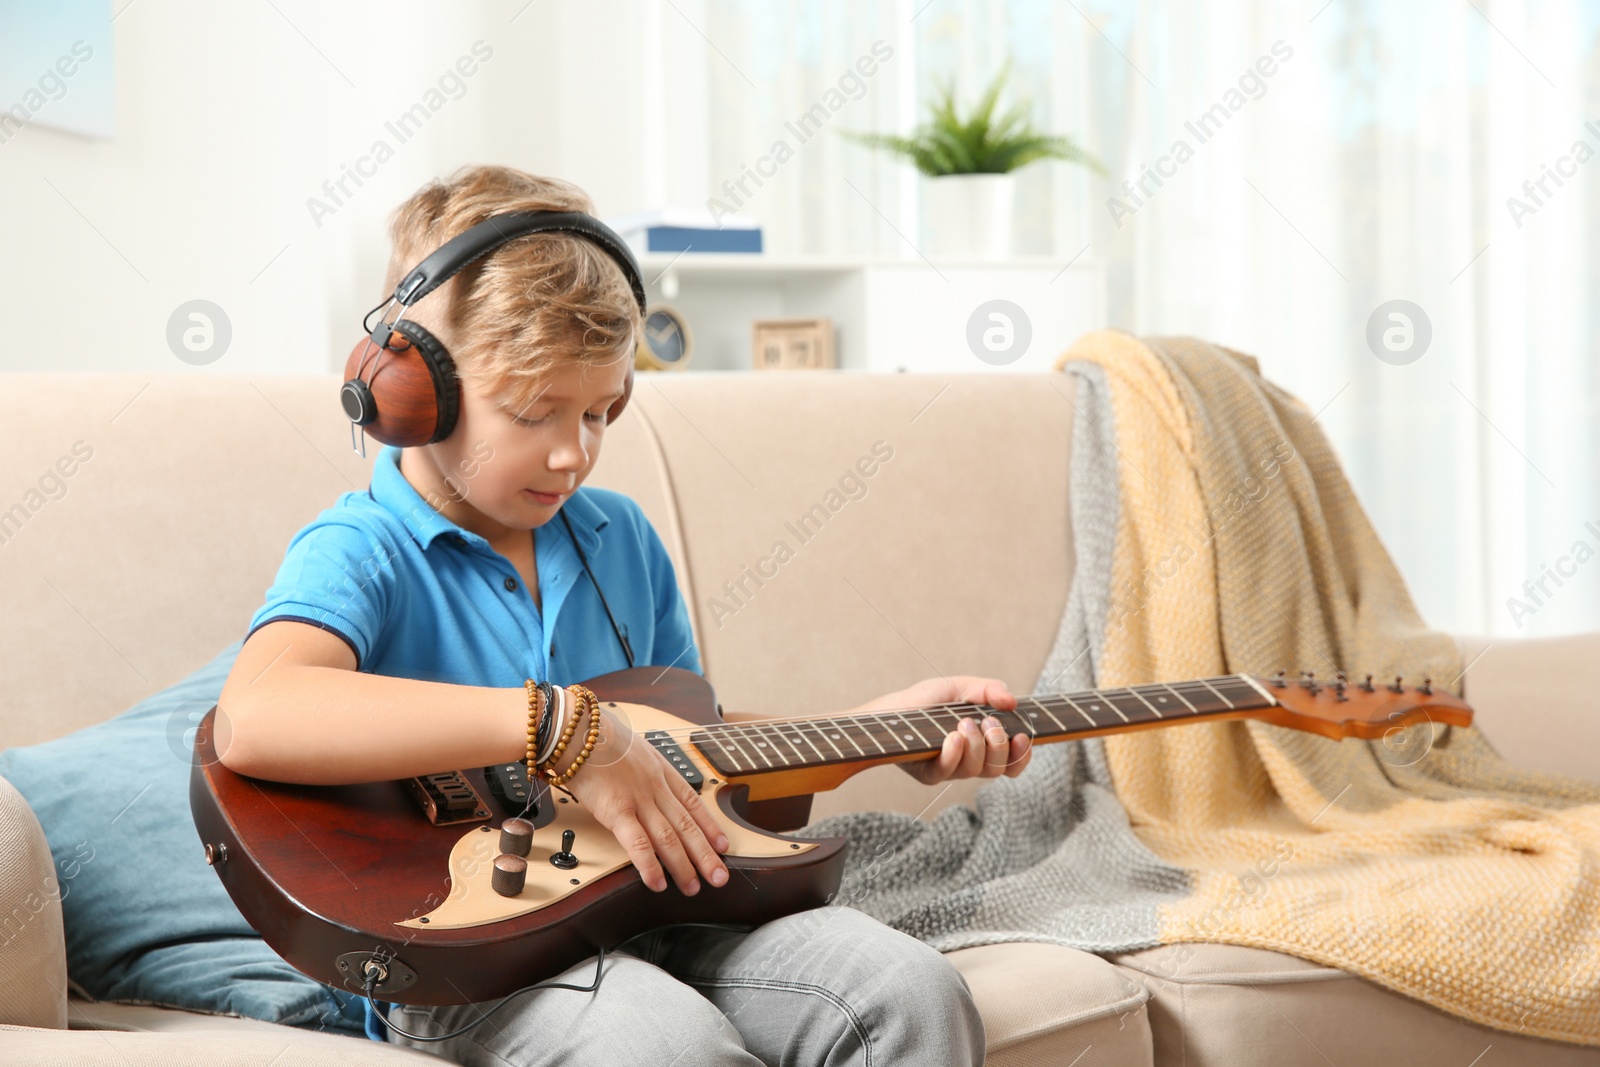 Photo of Cute little boy with headphones playing guitar on sofa in room. Space for text